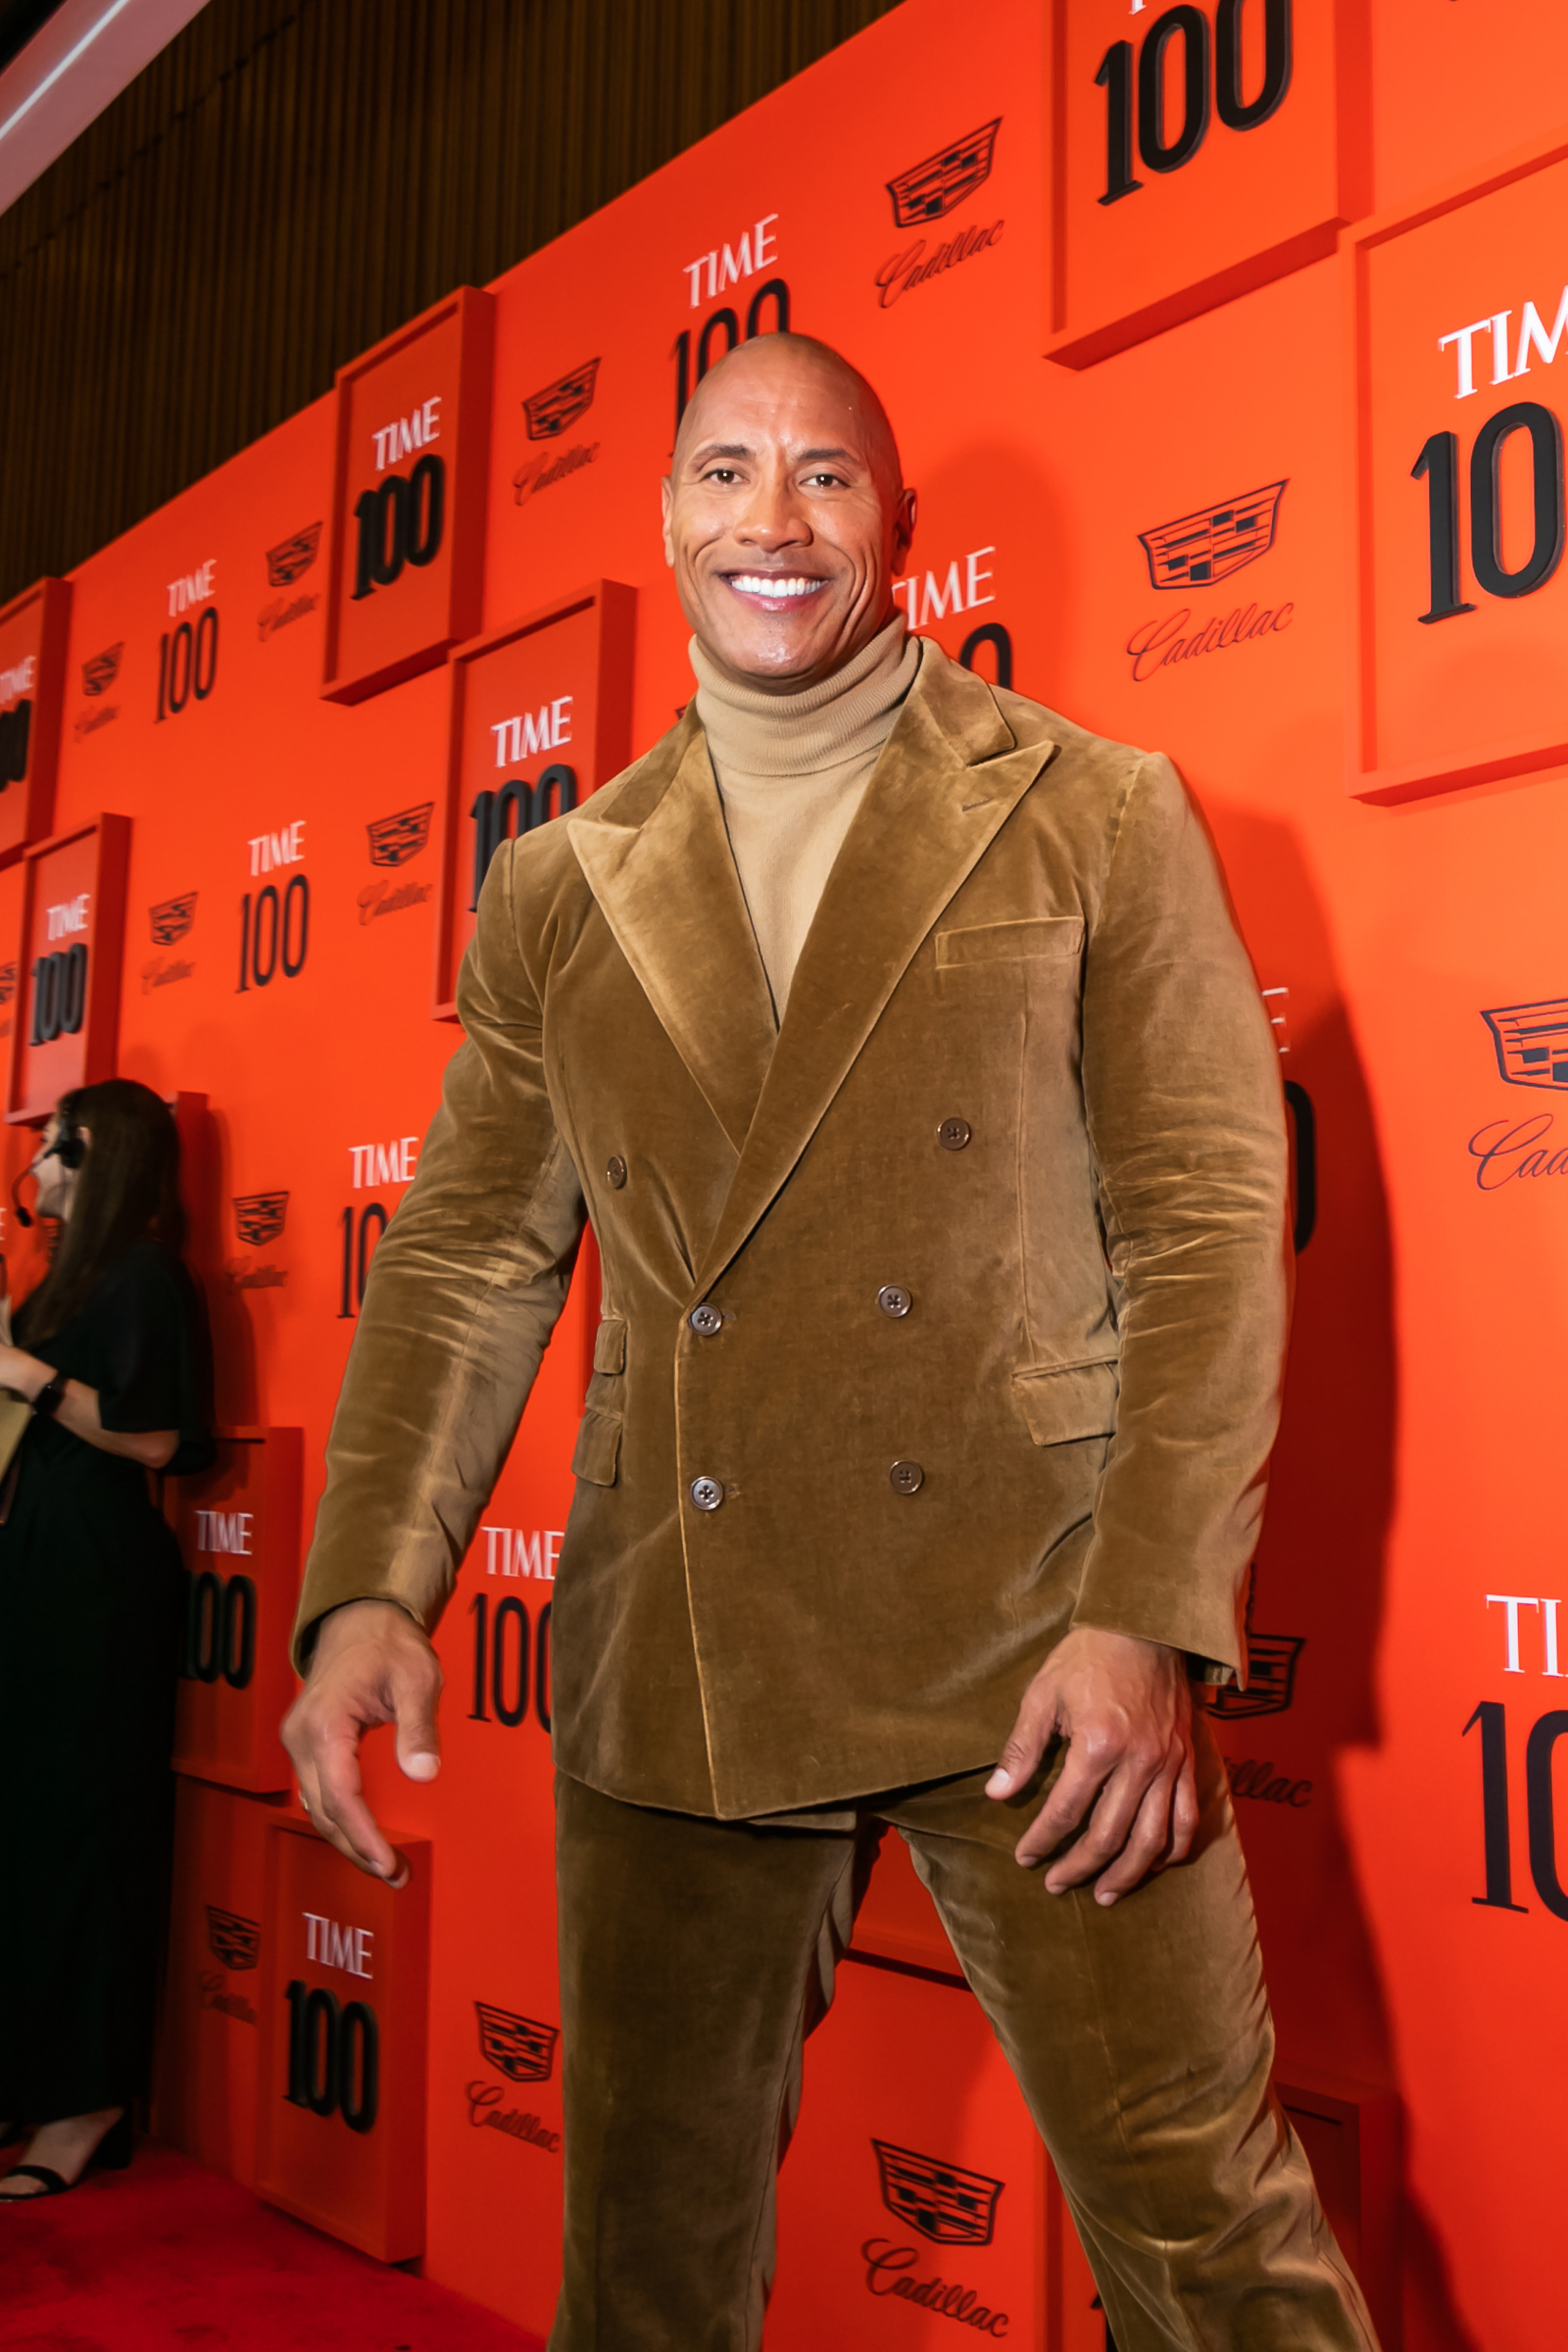 Dwayne the Rock Johnson at the Time 100 Gala at Jazz at Lincoln Center in New York City on April 23, 2019. (Kevin Tachman for TIME)